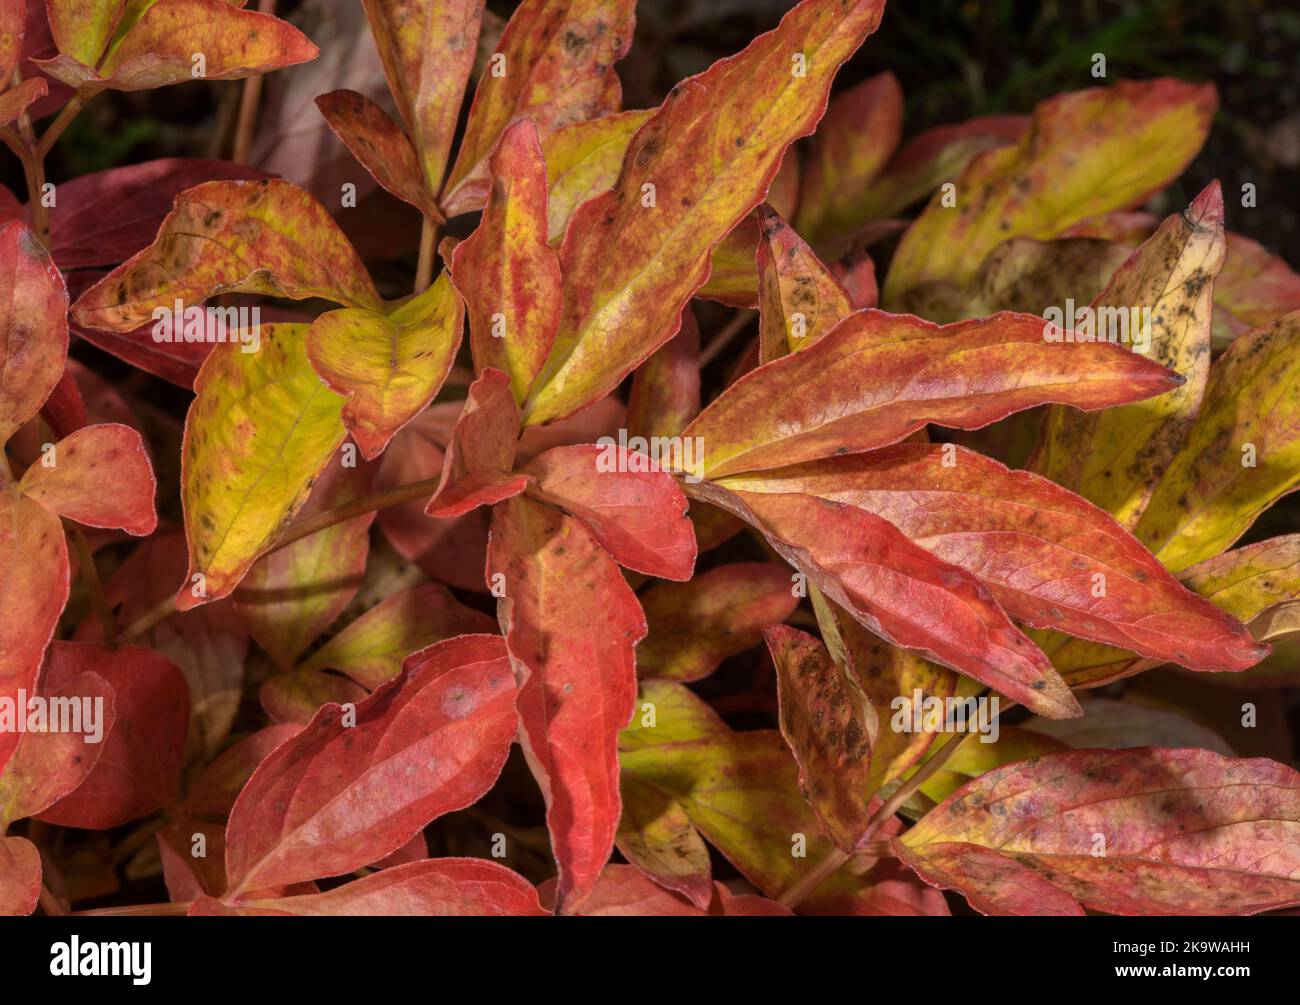 The leaves of a Peony, Paeonia lactiflora 'Krinkled White' in October, with autumn colour. Garden. Stock Photo